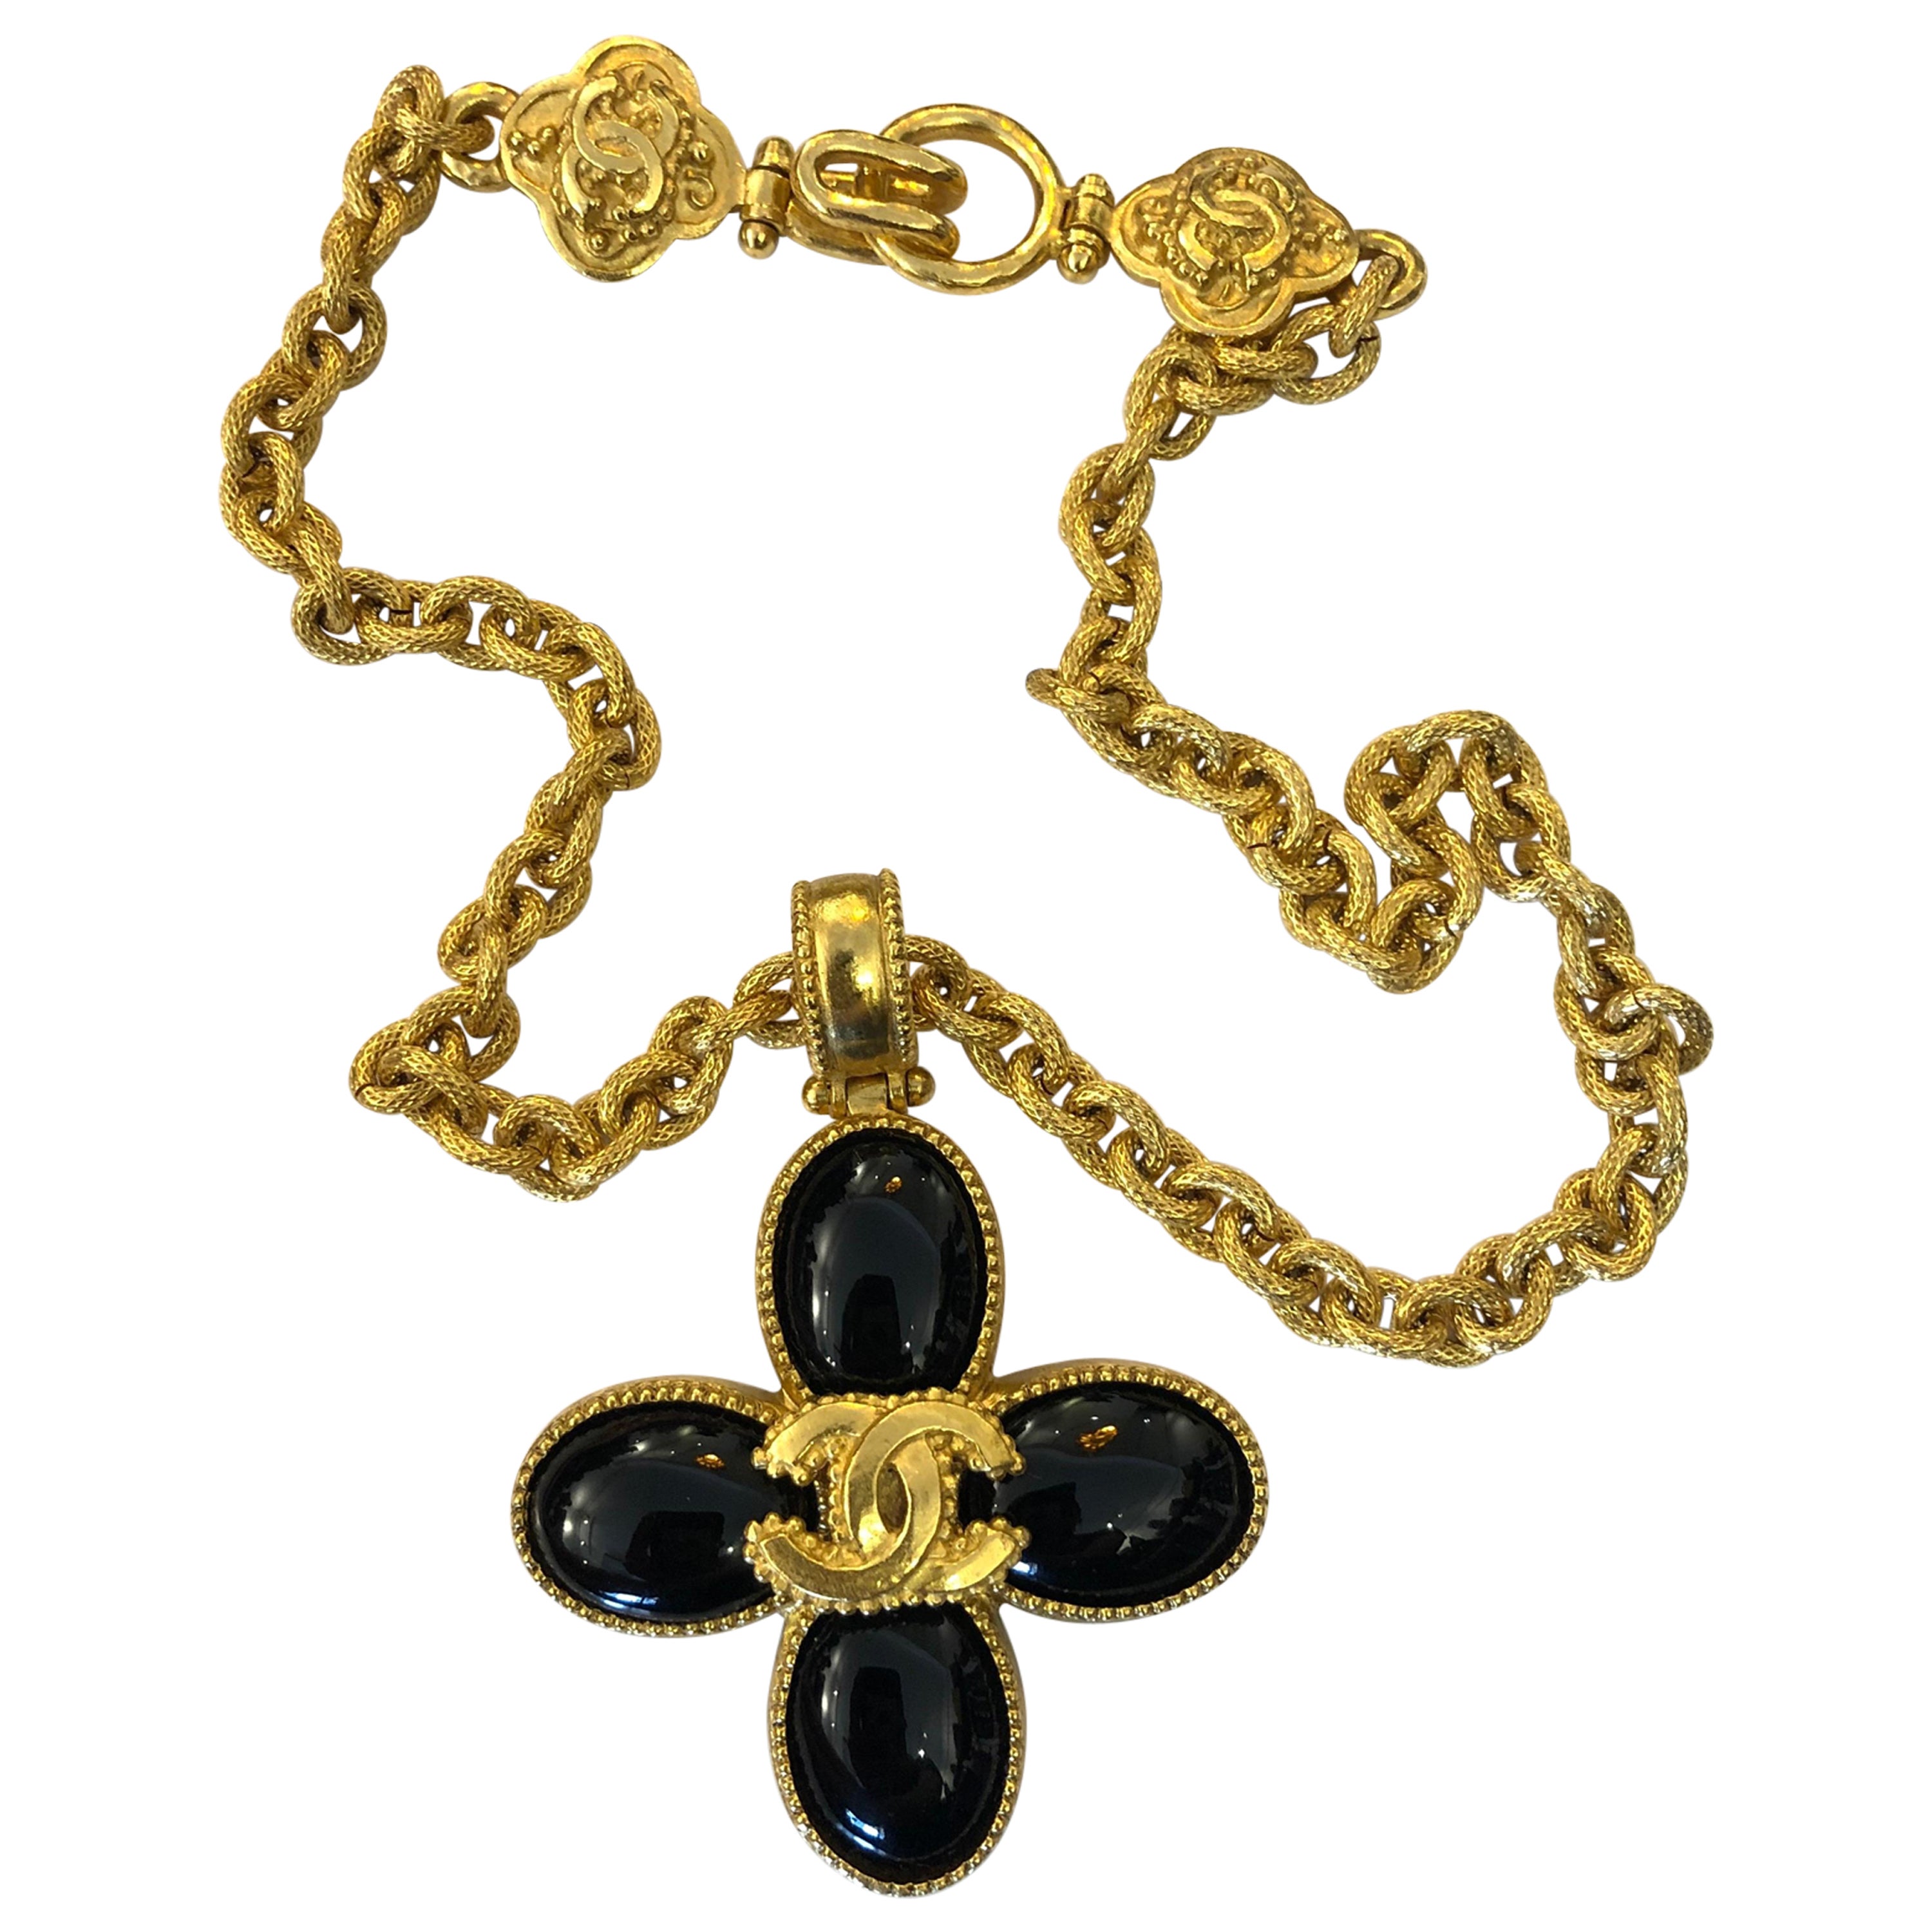 Chanel Necklaces Gold Onyx - 16 For Sale on 1stDibs